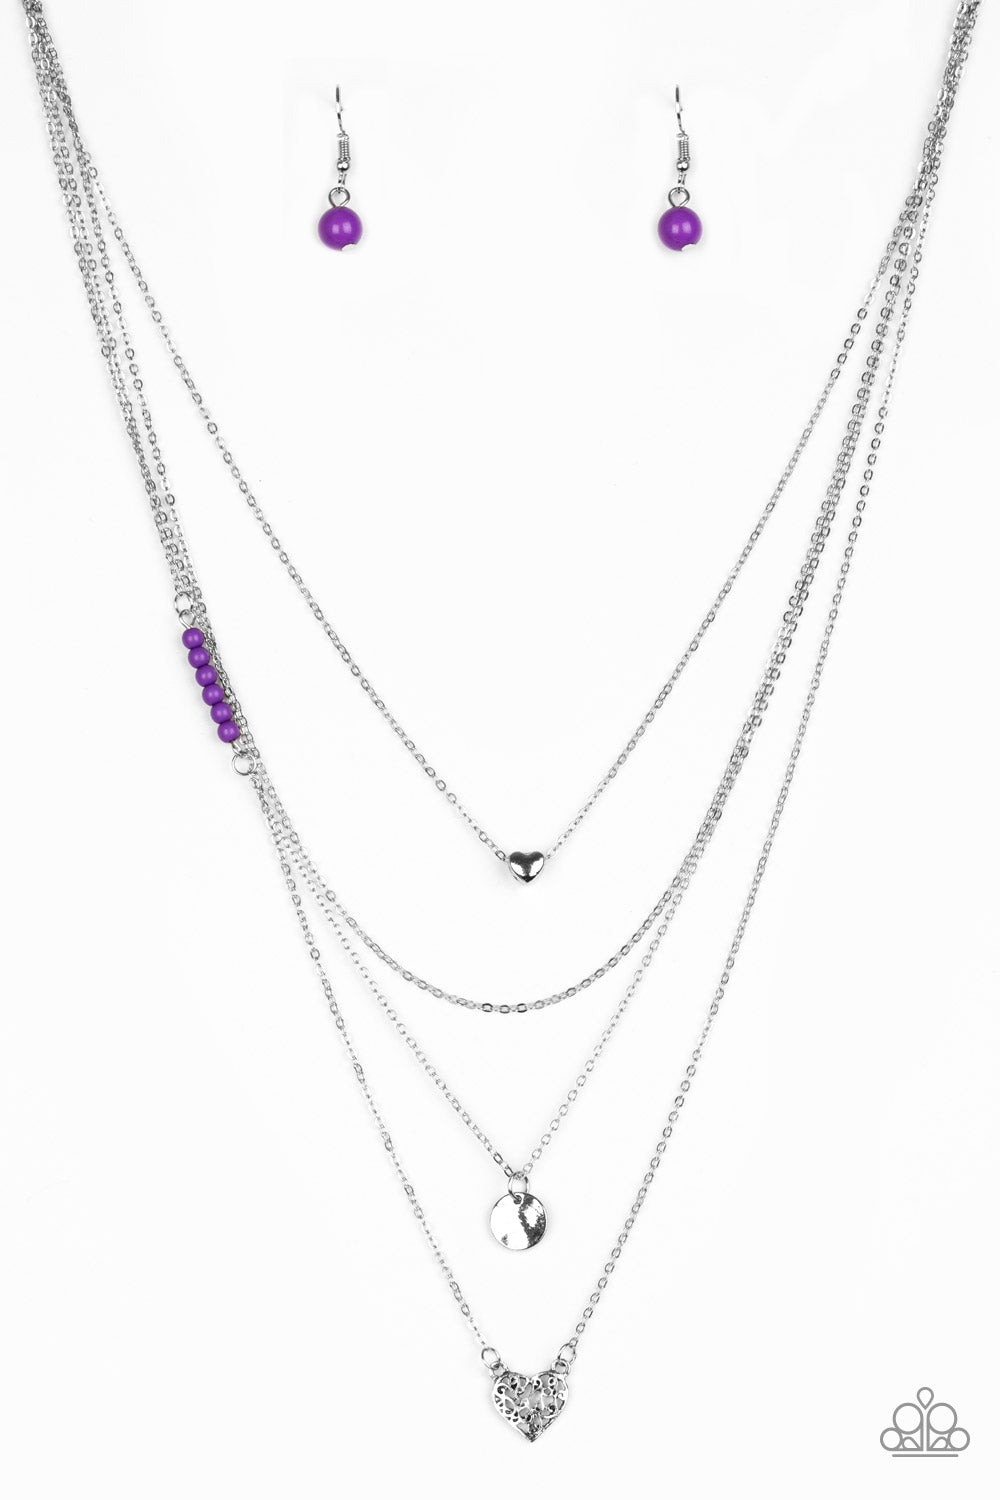 Paparazzi Accessories - Gypsy Heart - Purple Necklace - Alies Bling Bar